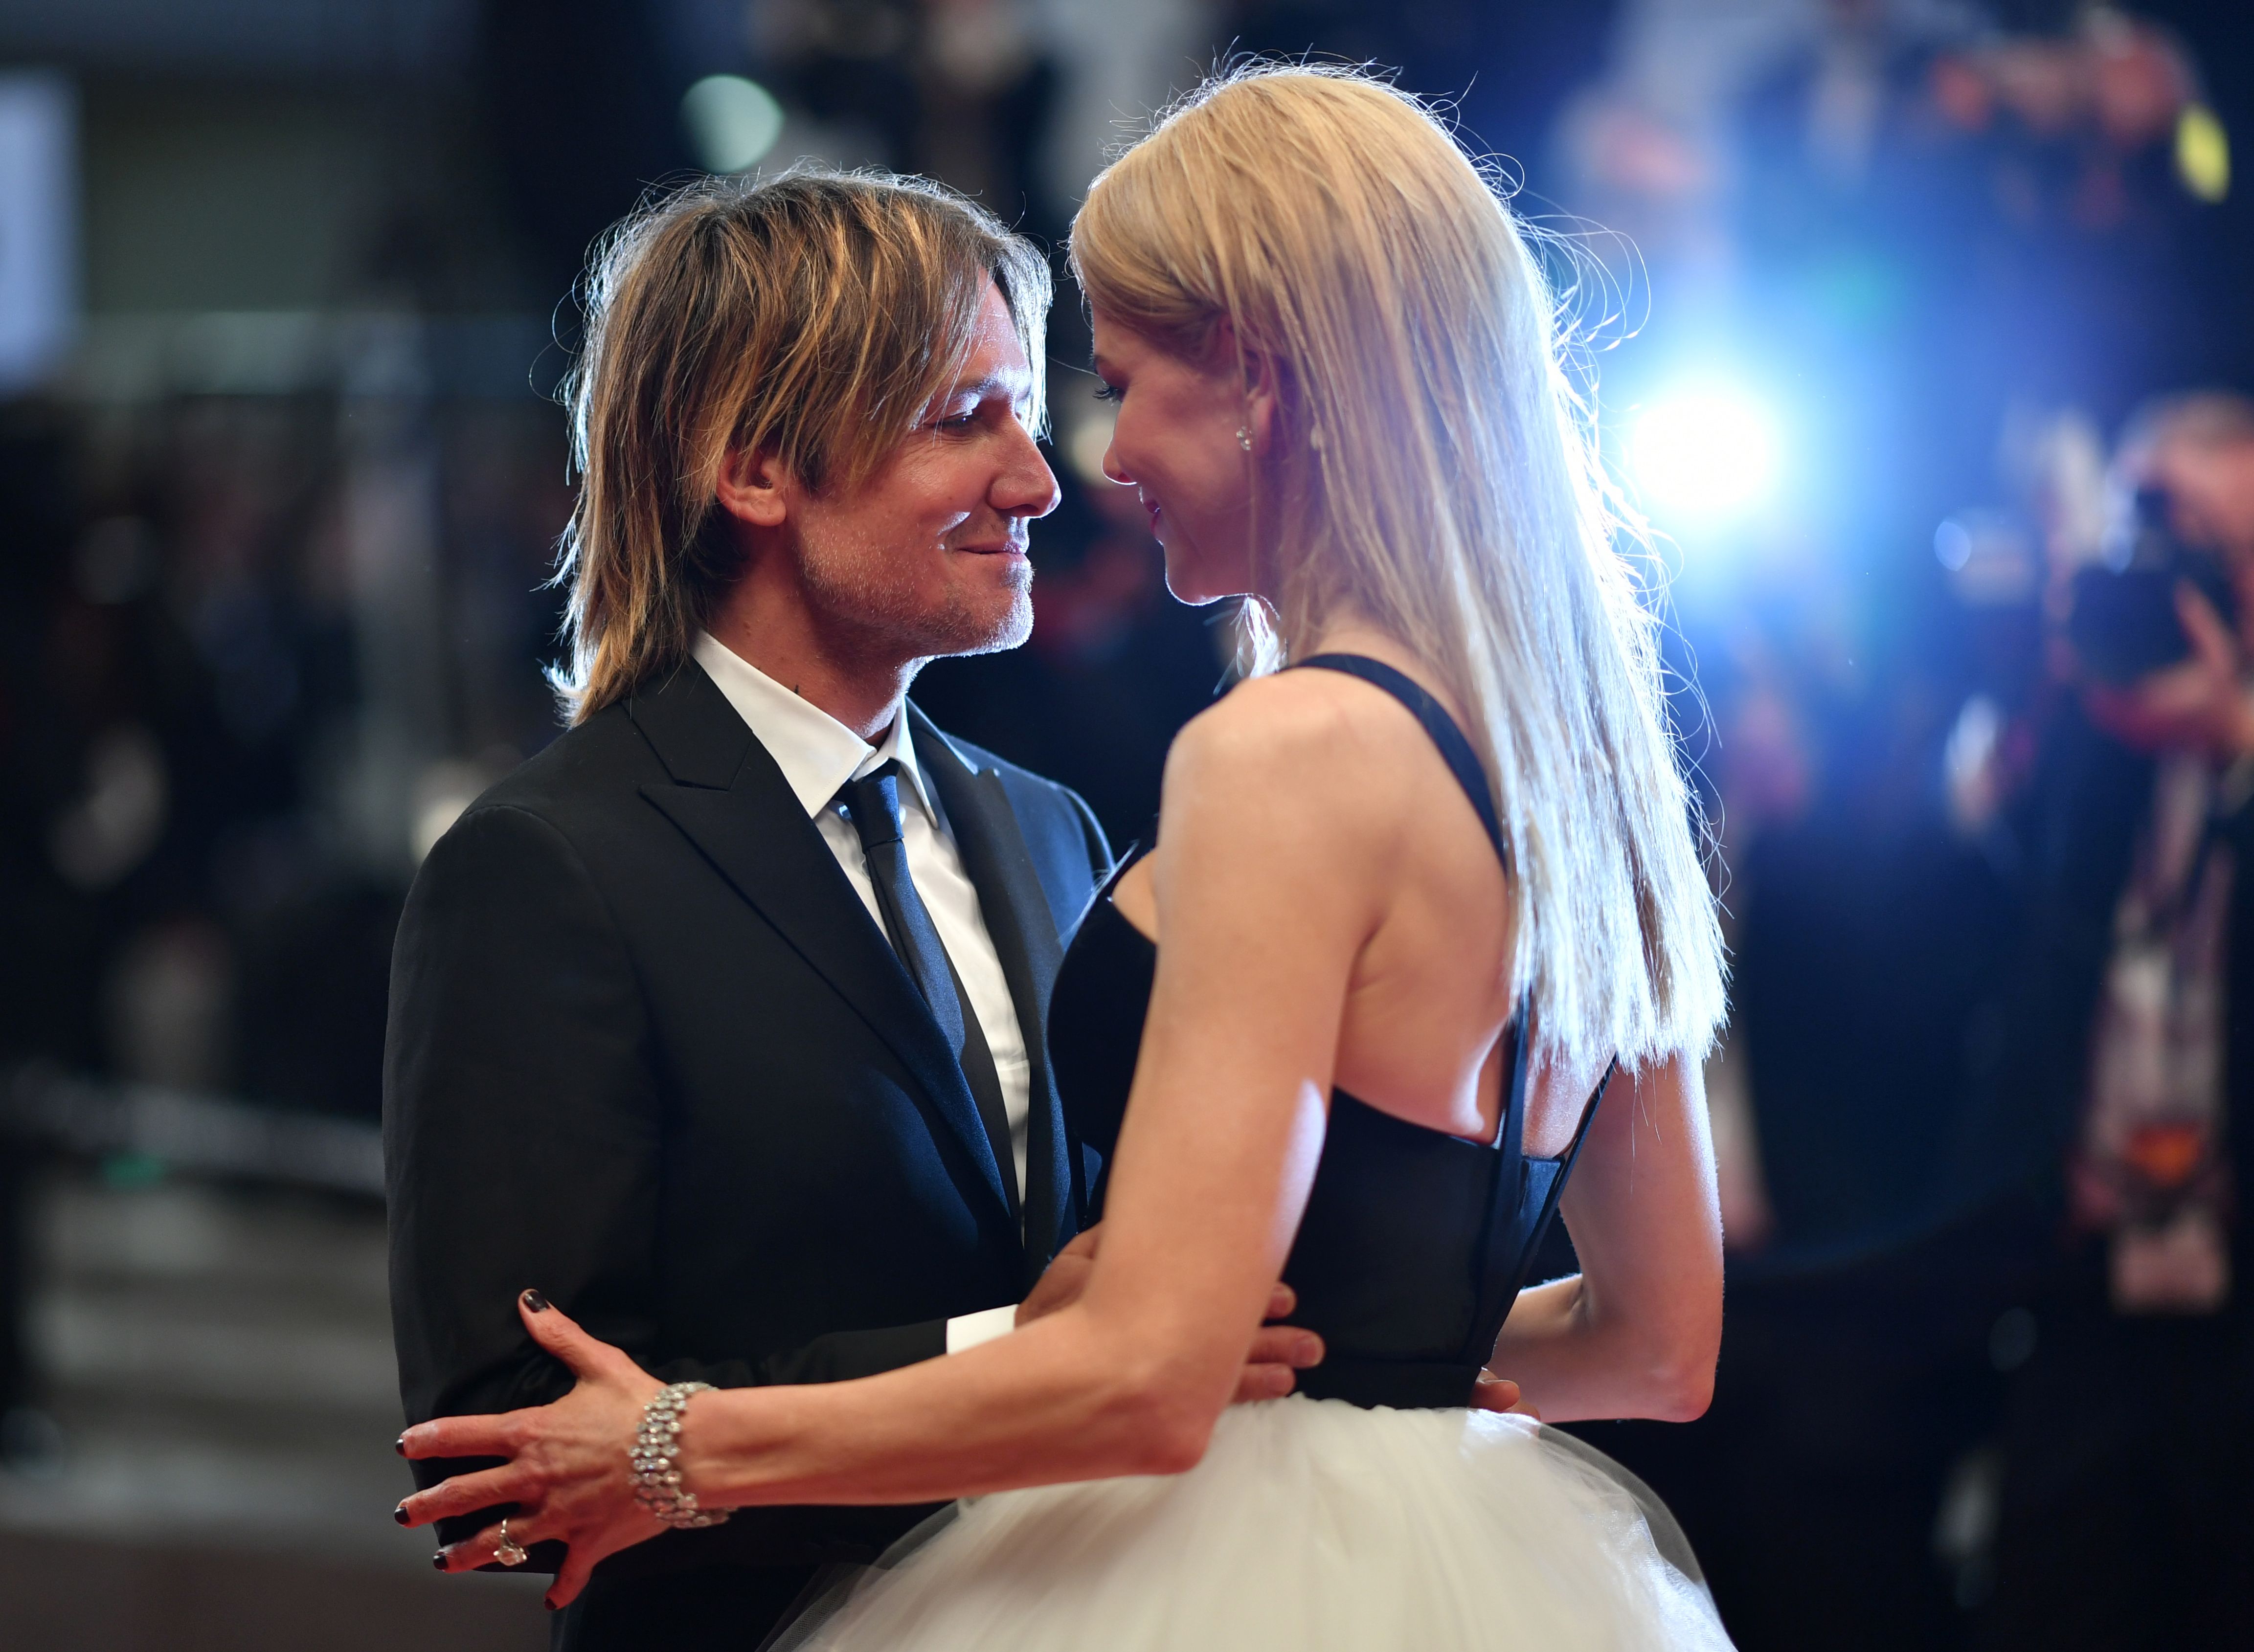 Nicole Kidman and Keith Urban at the Cannes Film Festival in Cannes, France on May 22, 2017 | Source: Getty Images